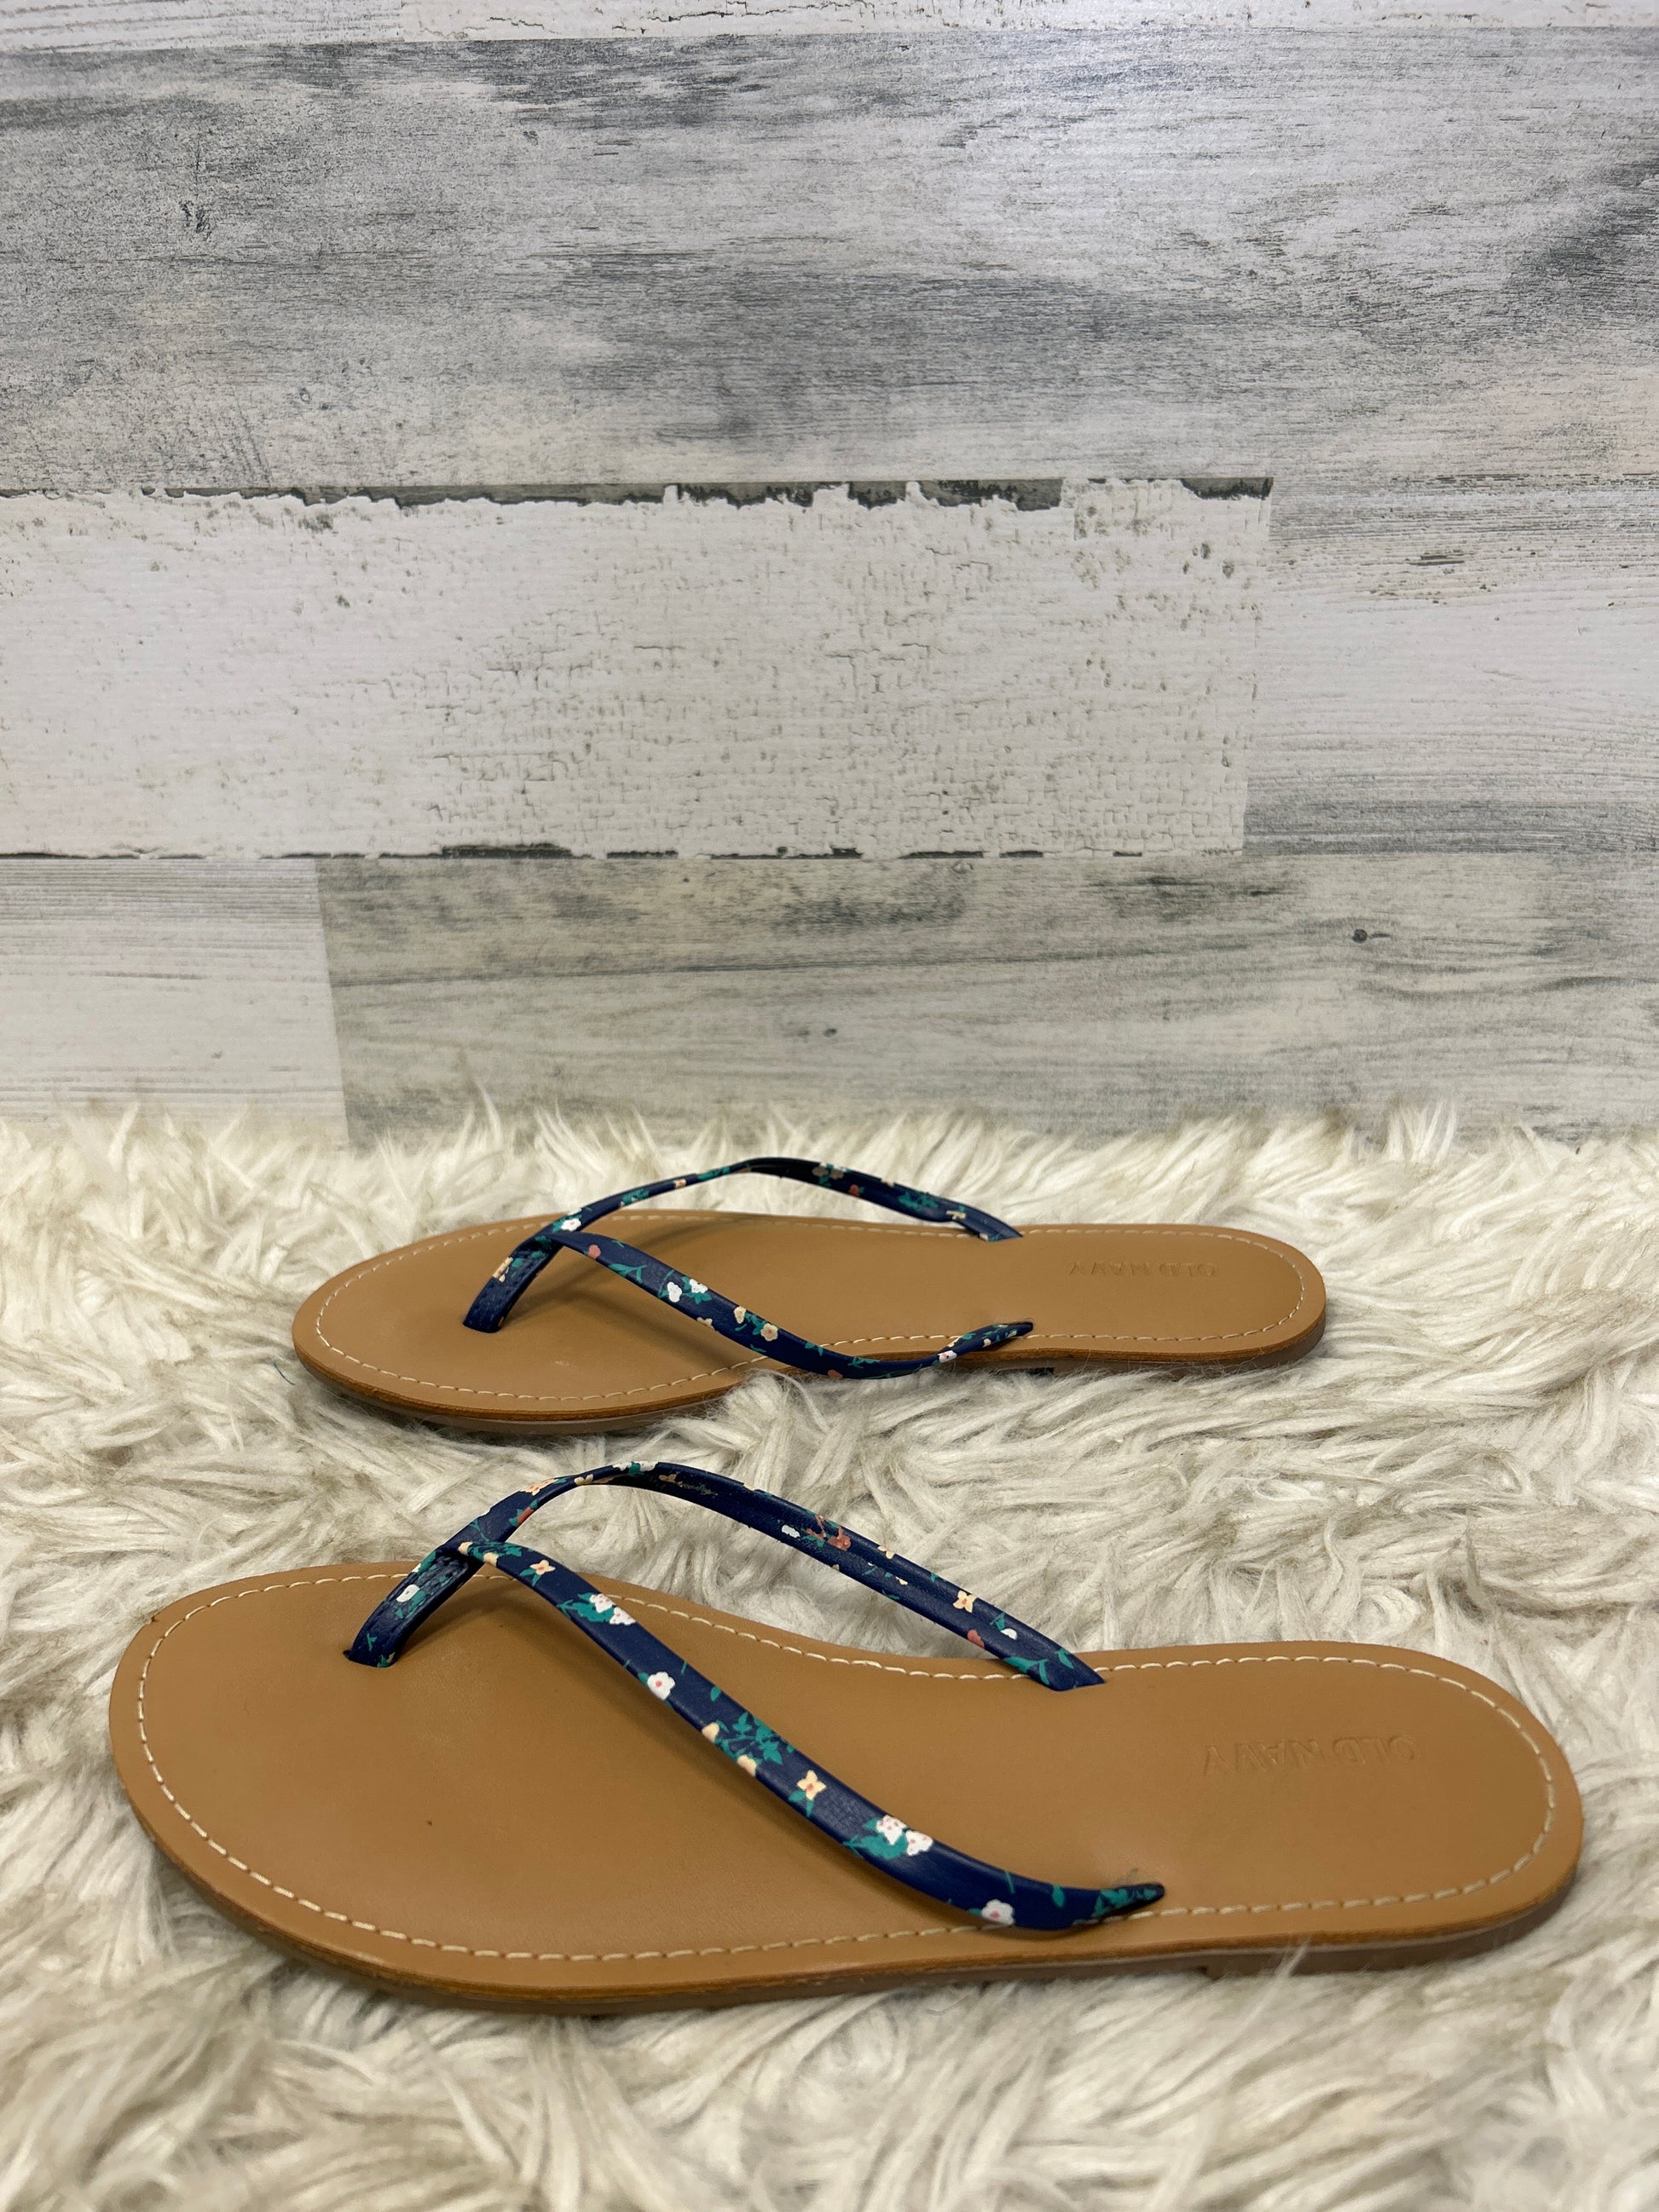 Sandals Flip Flops By Old Navy Size: 8 – Clothes Mentor Mishawaka IN #153